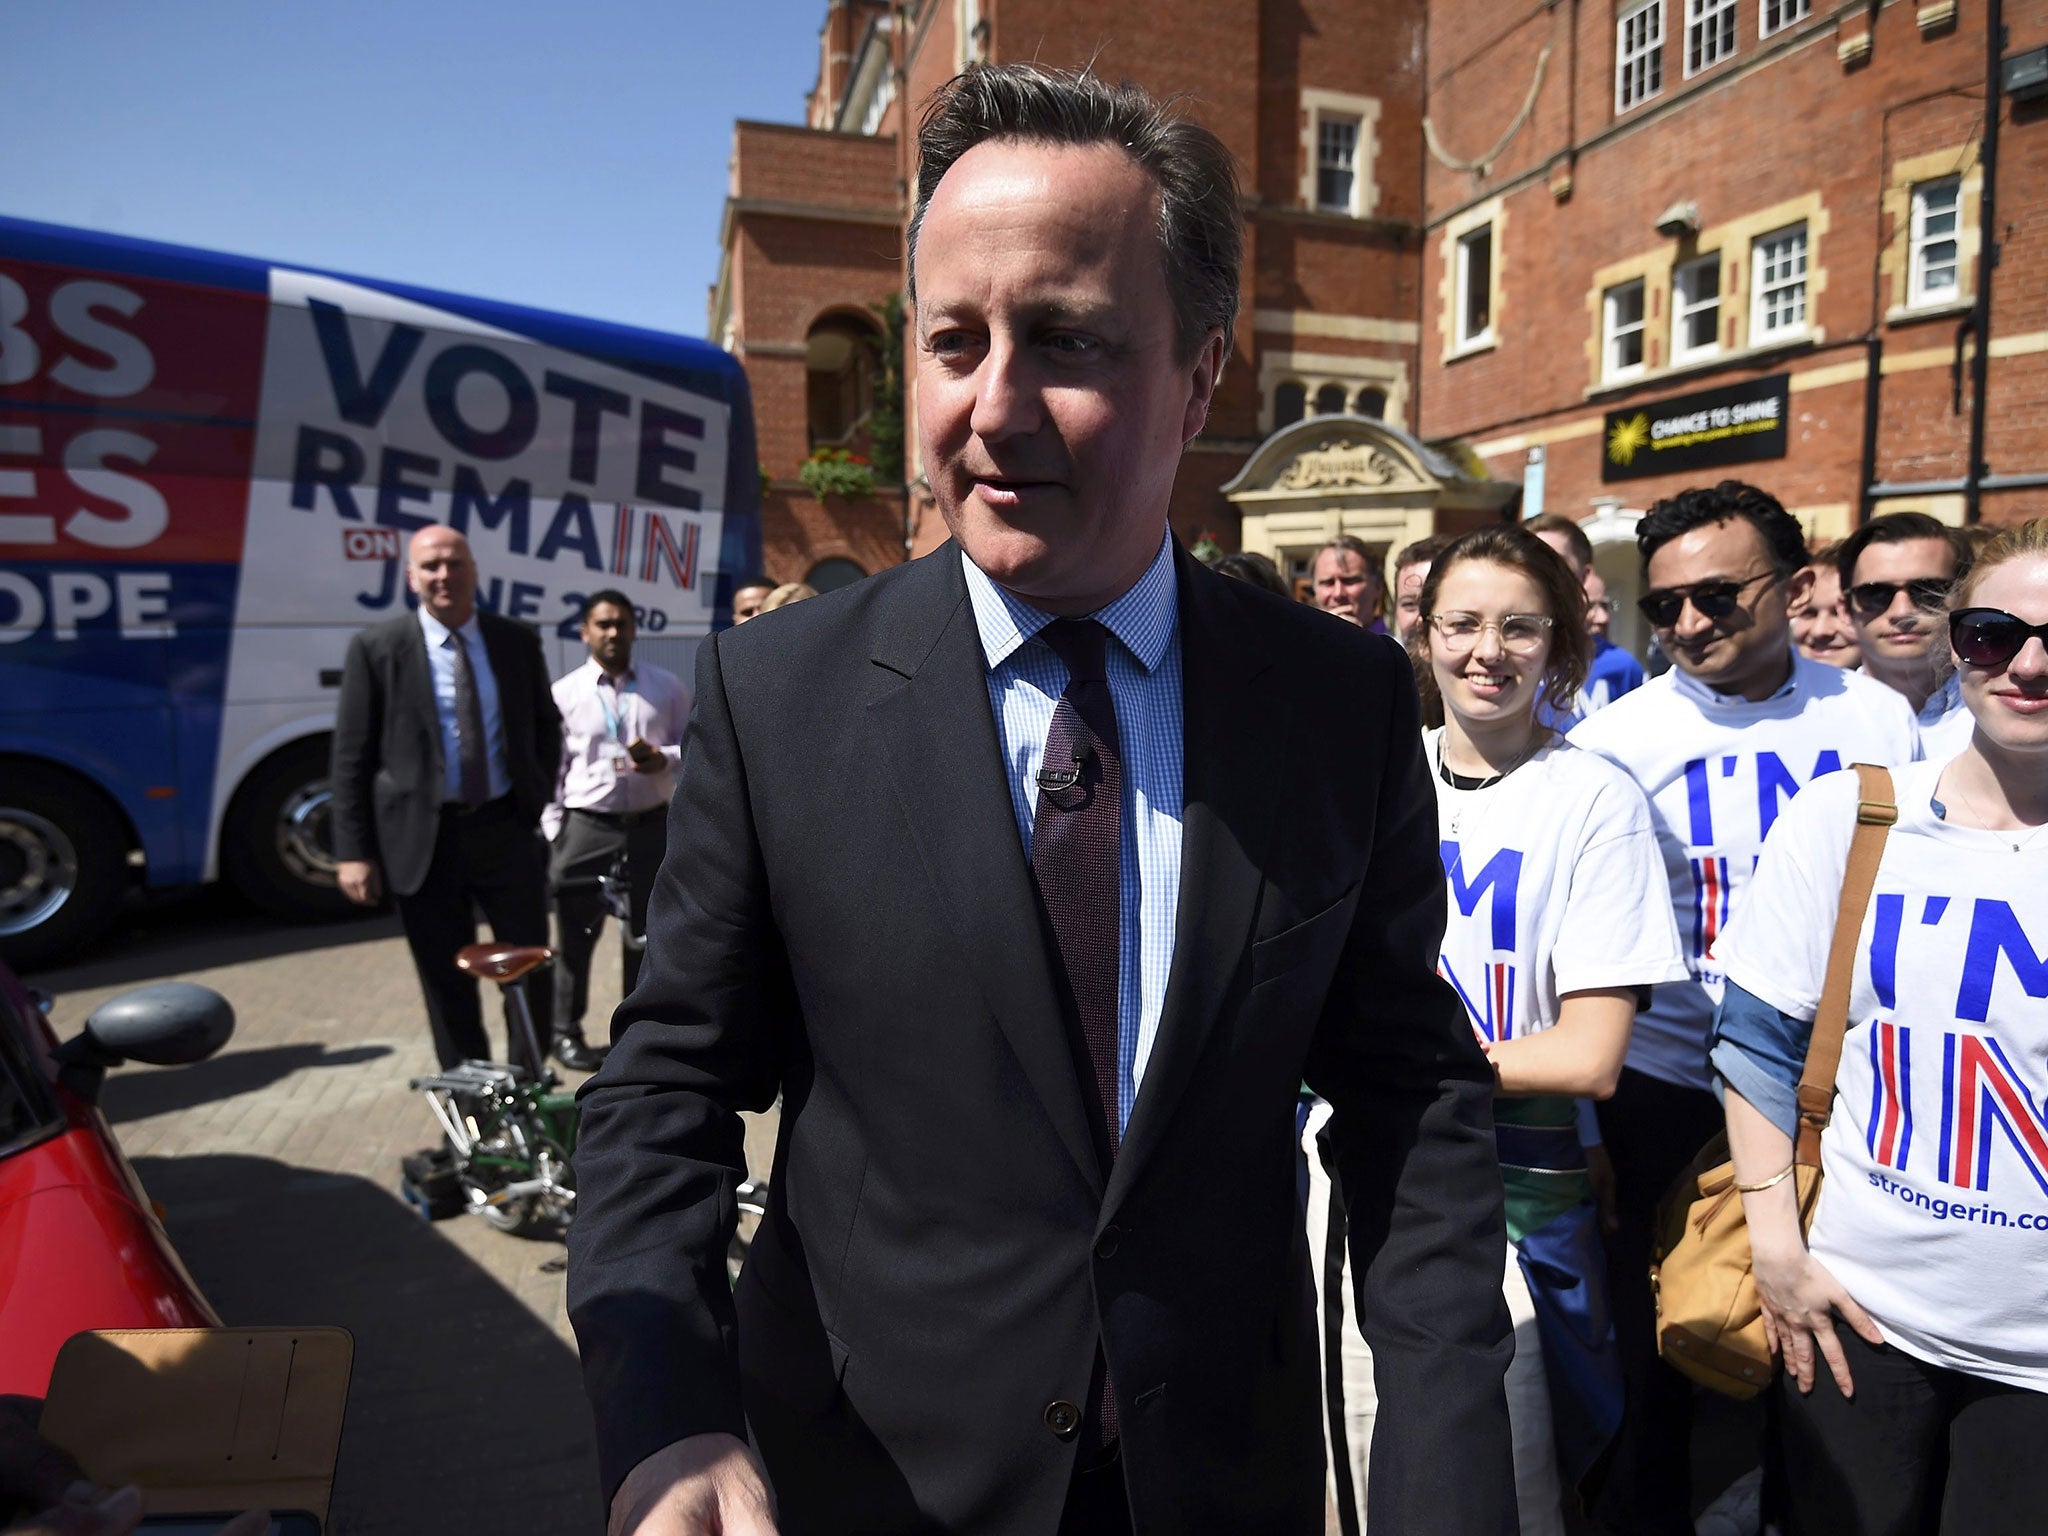 David Cameron talks with suppoters at a campaign event for Britain Stronger In Europe